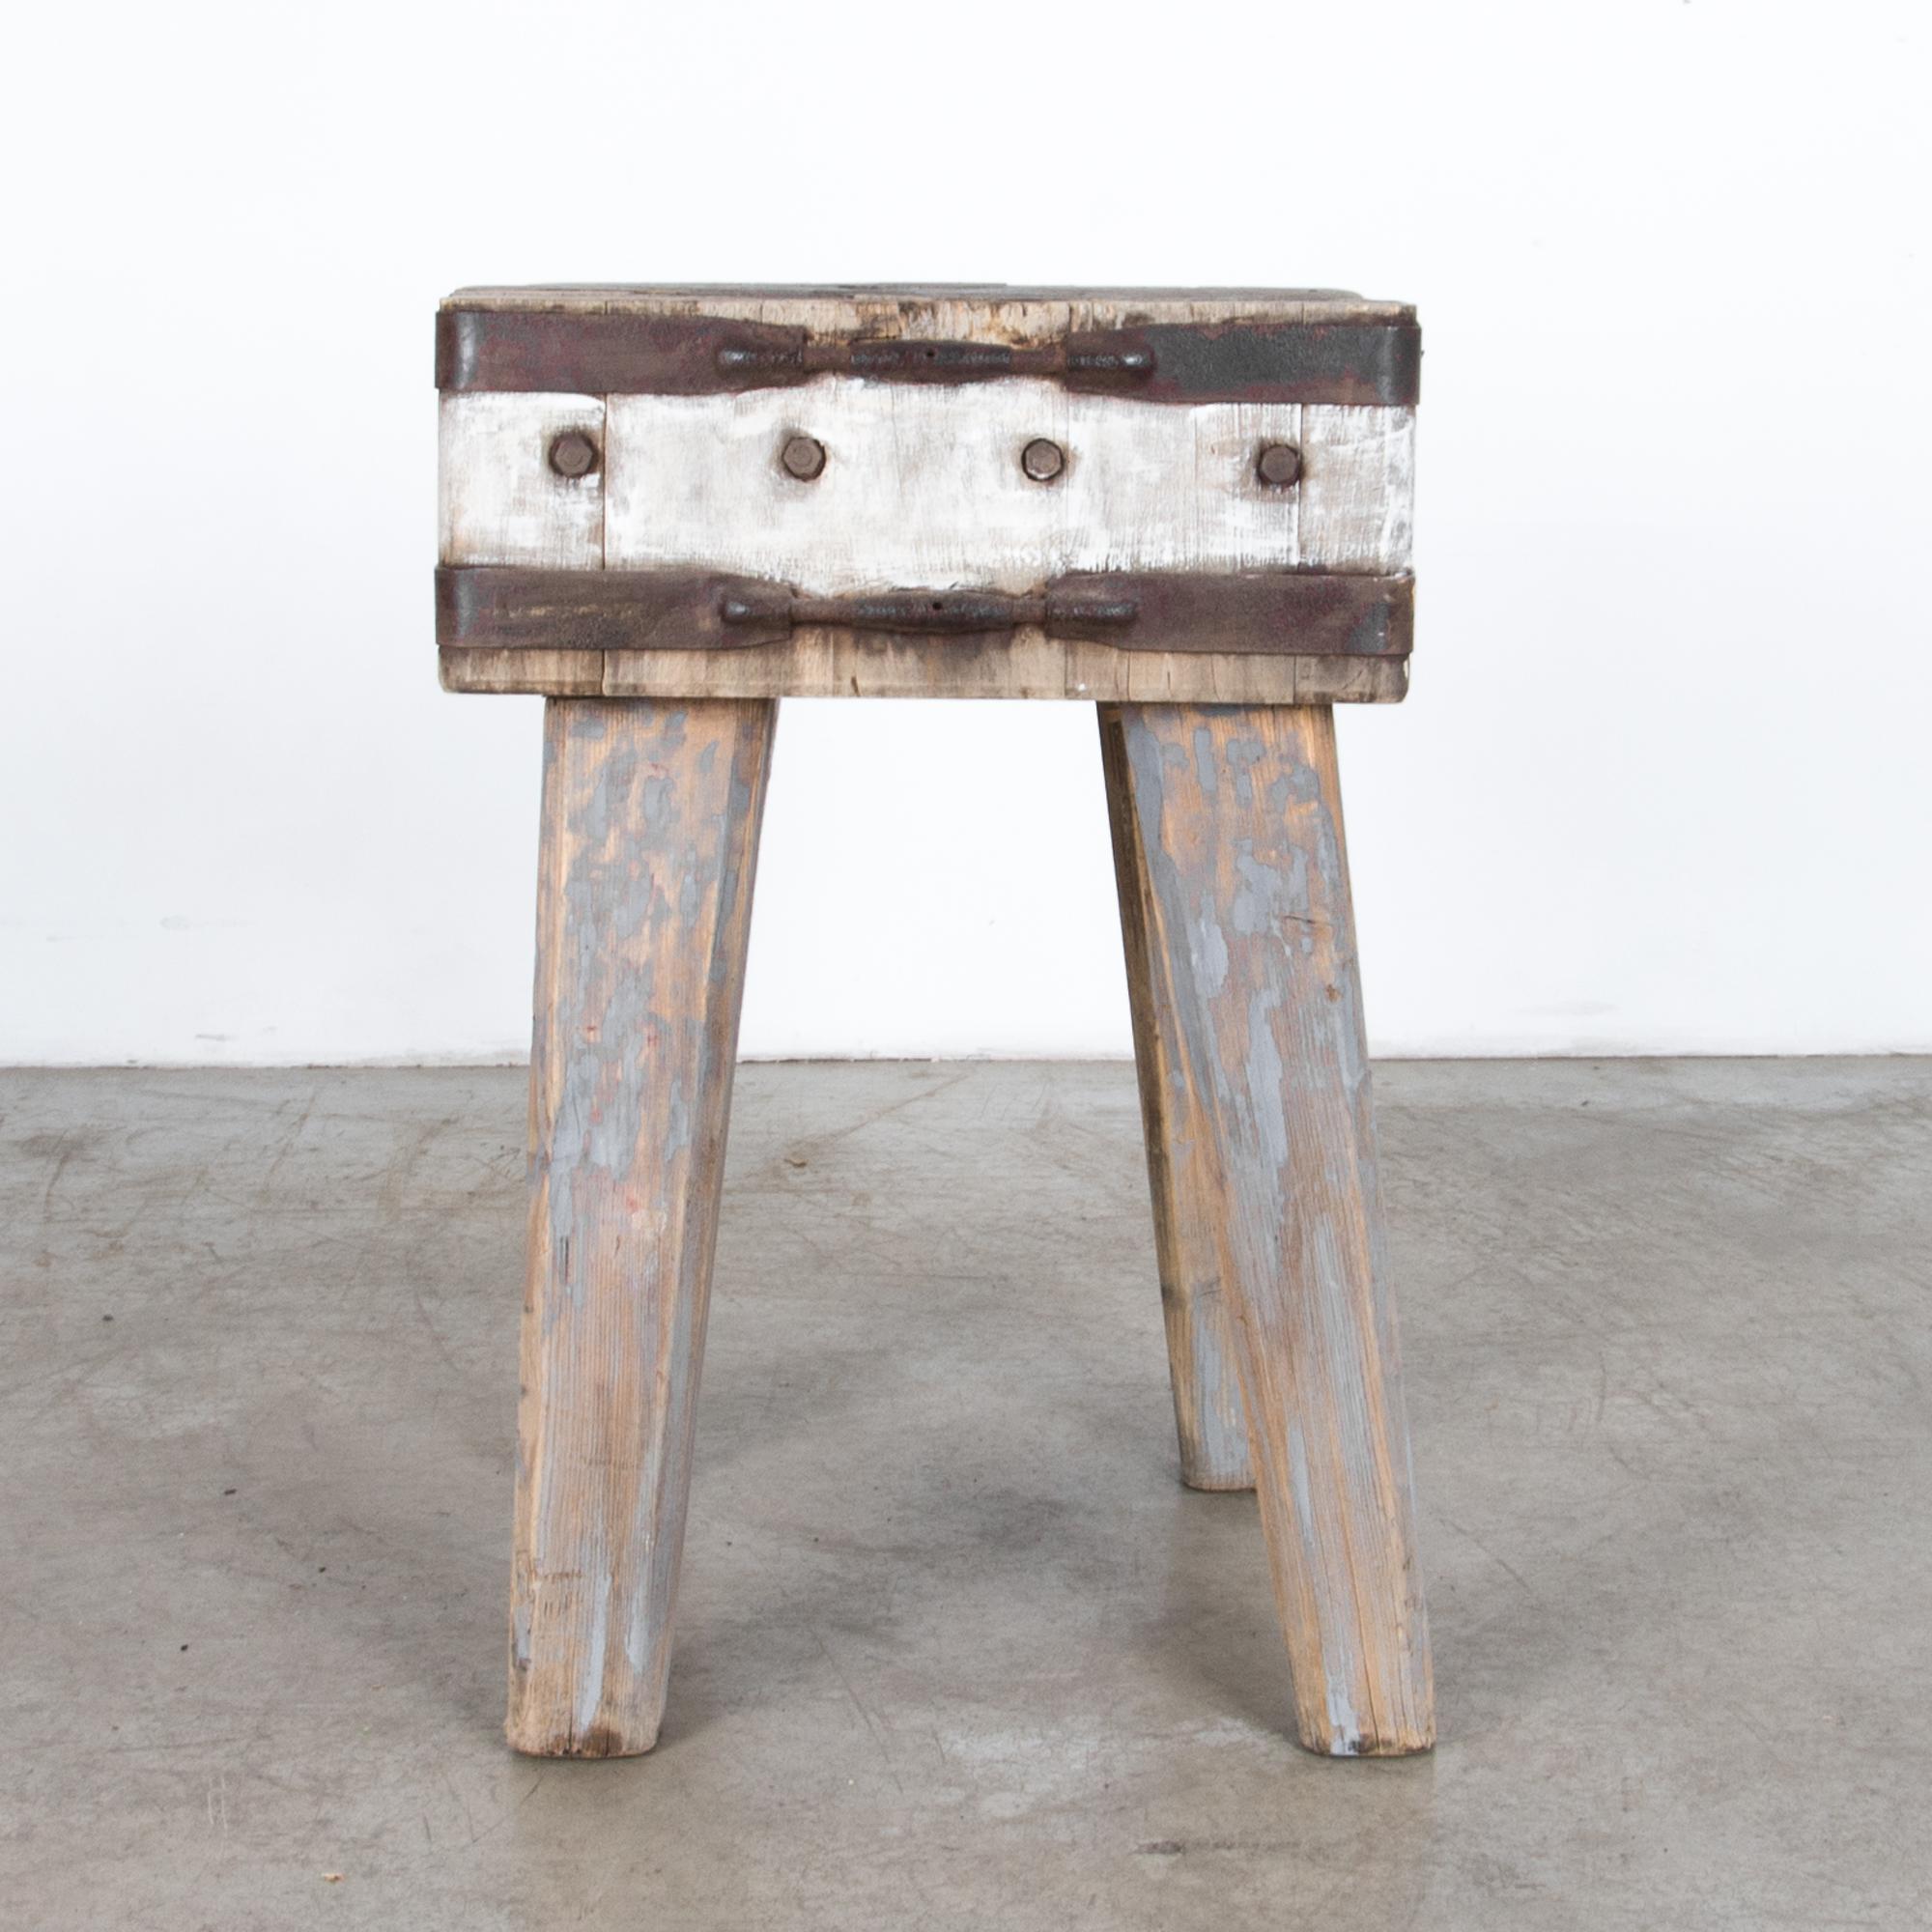 This curious small table comes from France circa 1900, originally used as a butcher block cutting surface. Painted at a later date, a palette of cool grey and white creates a surprising contrast with warm beach wood and oxidized iron braces.